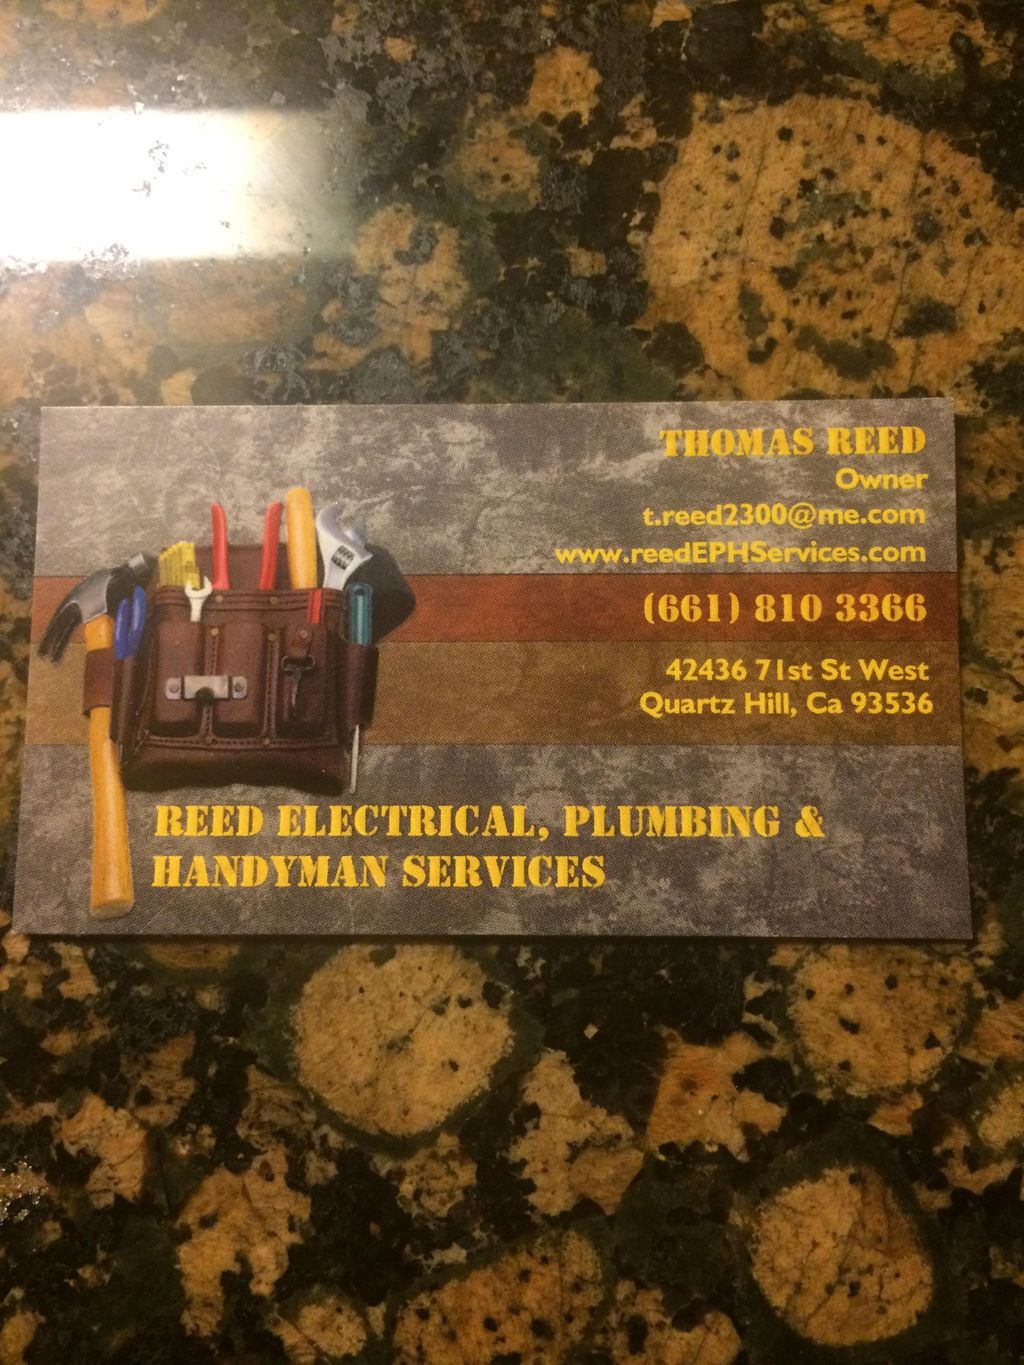 Reed's Electrical, Plumbing, and Handyman Services